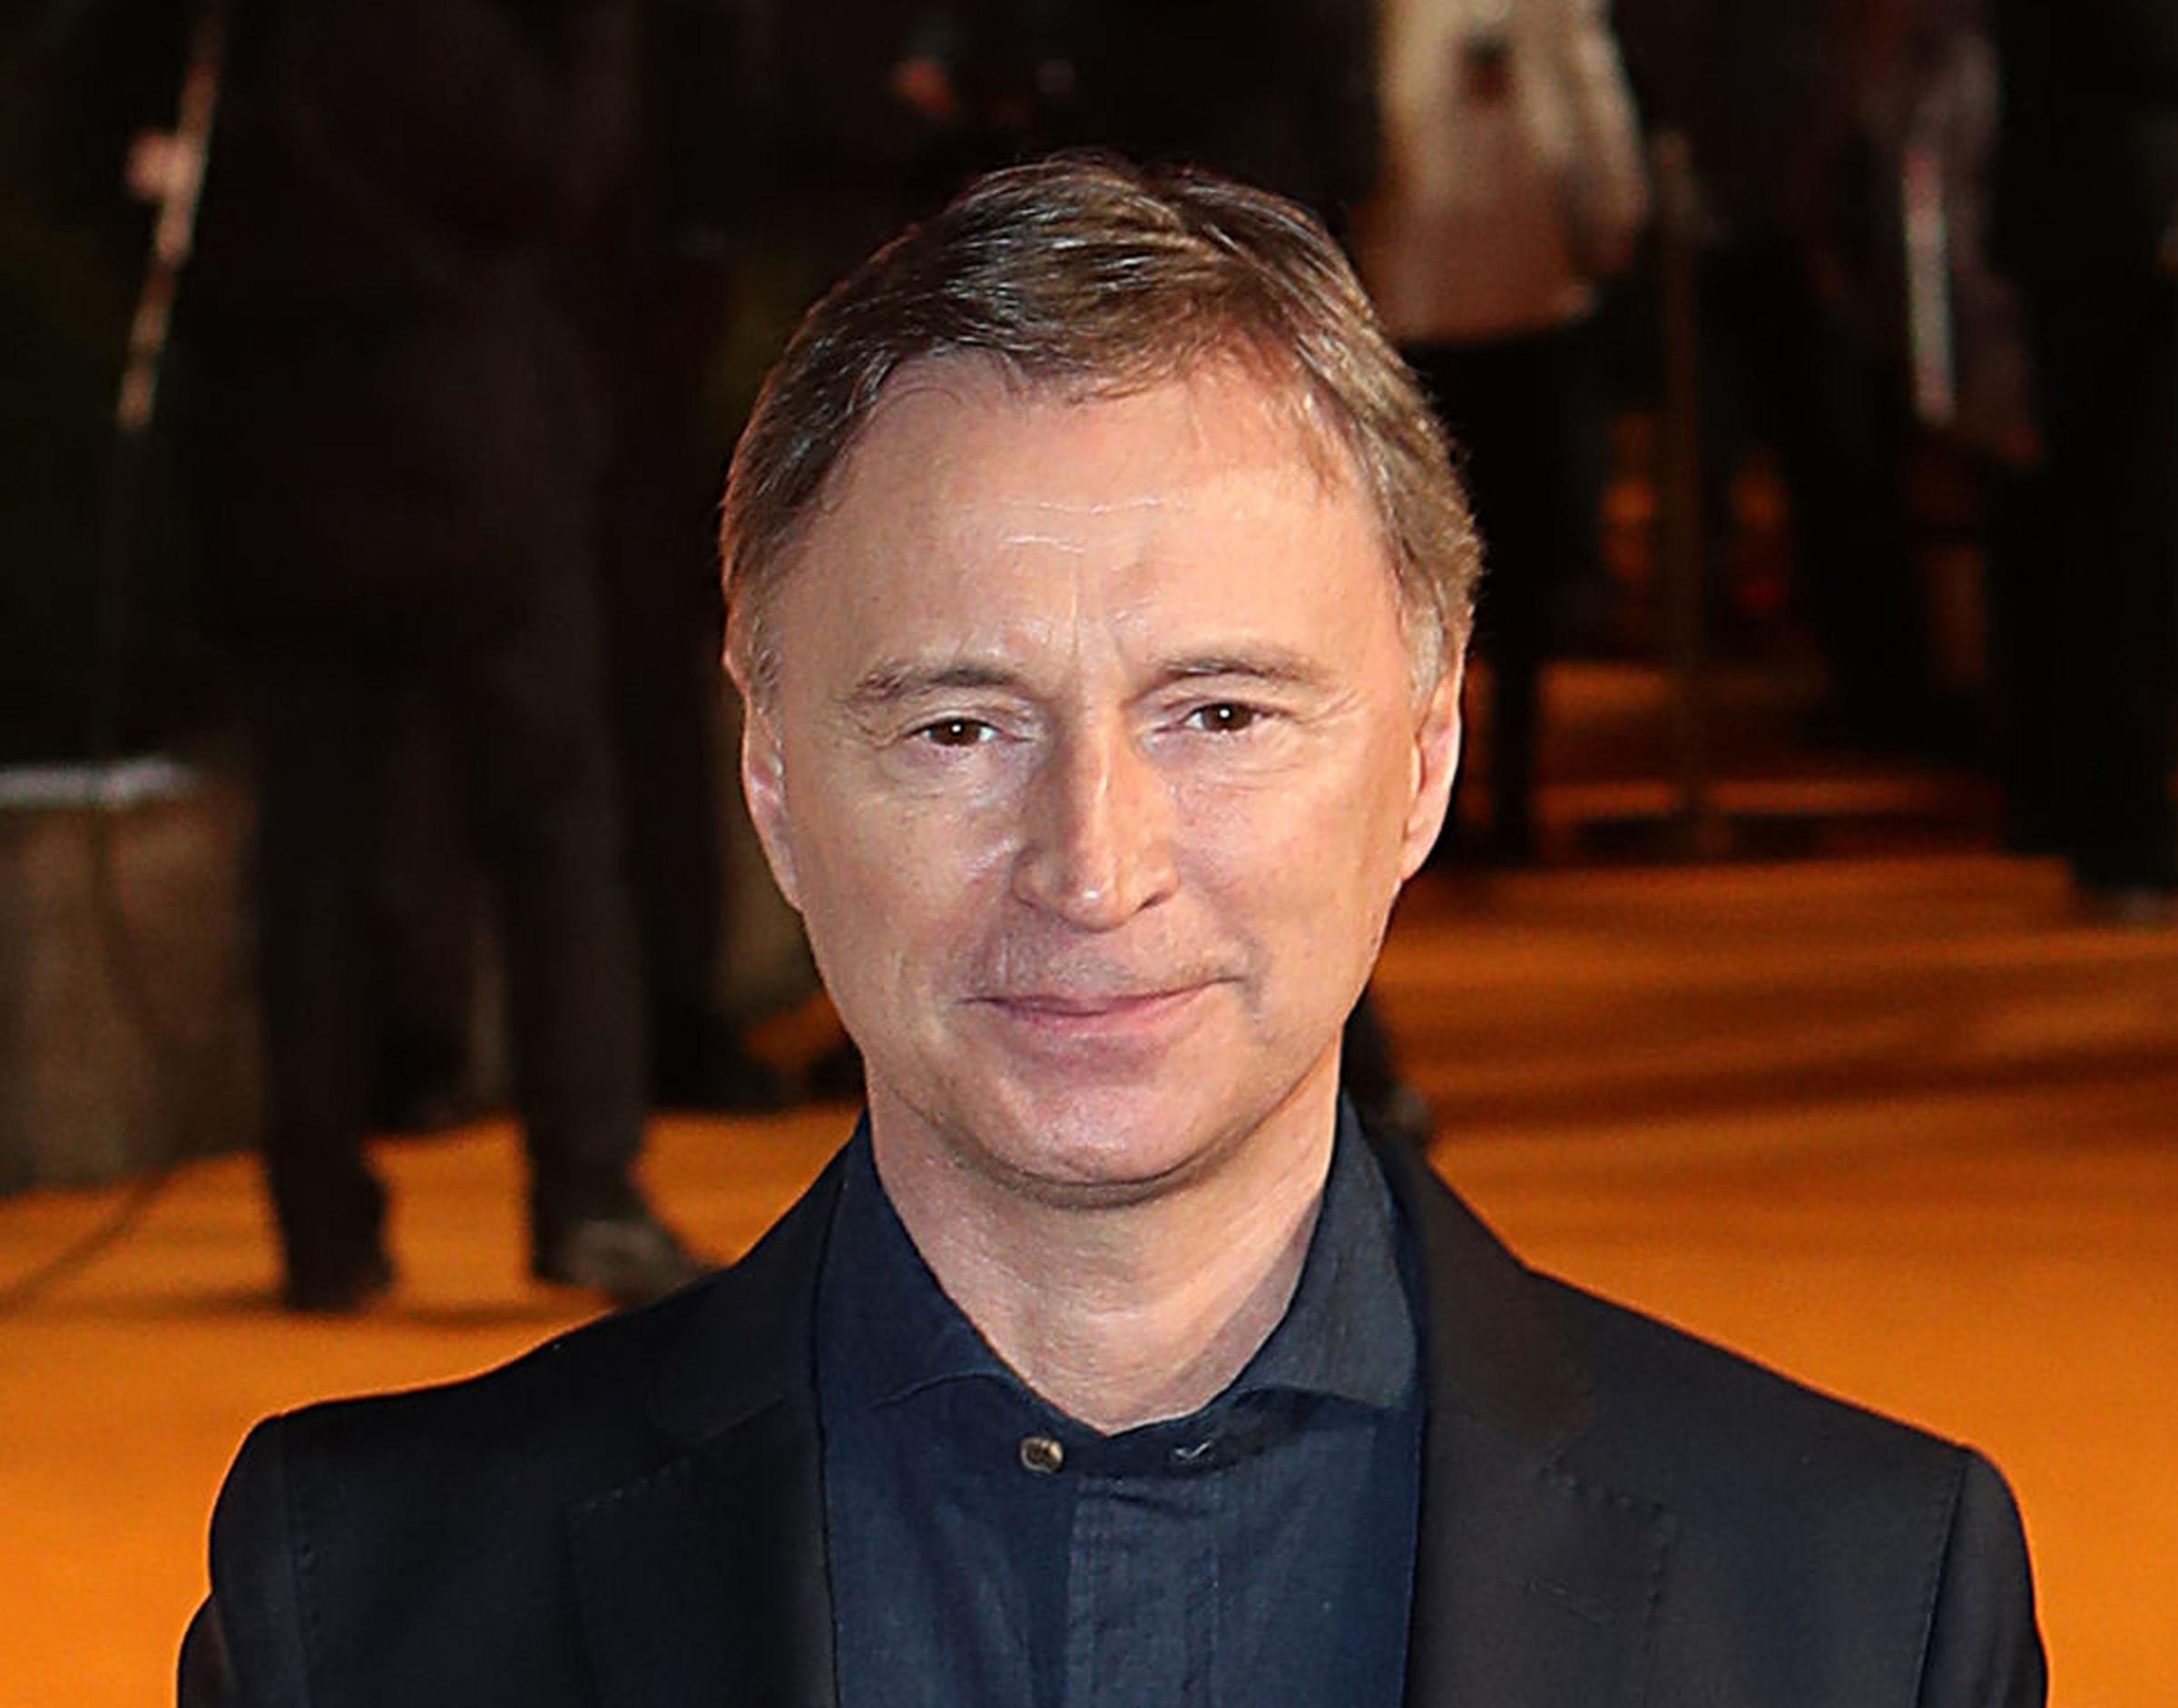 Robert Carlyle was moved by the poignant I remember messages